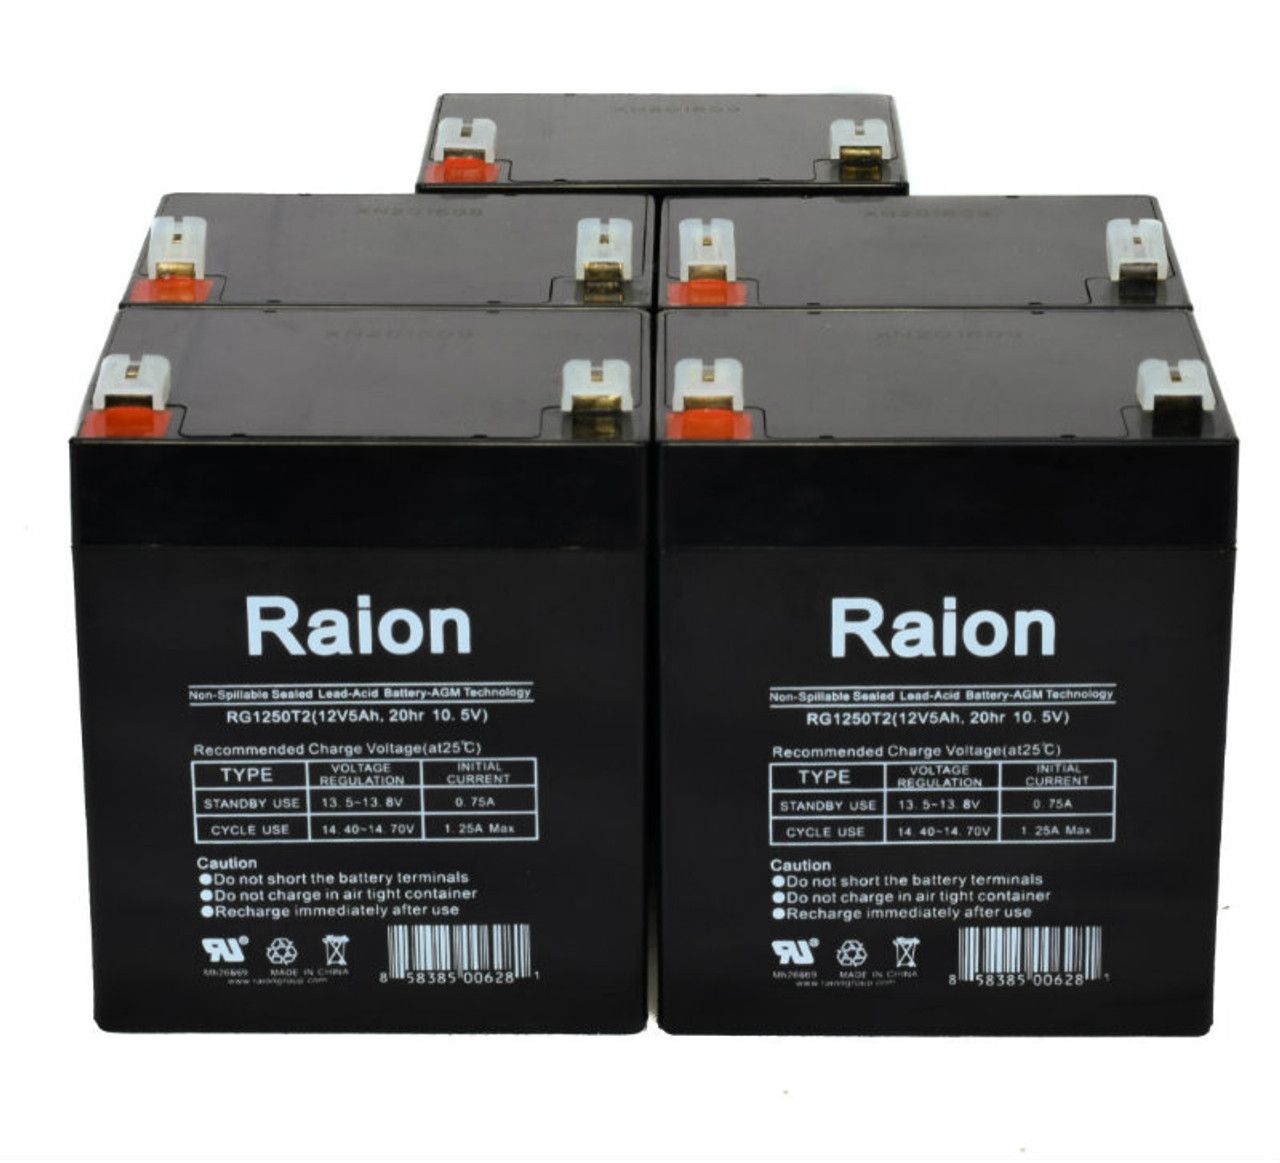 Raion Power 12V 5Ah RG1250T2 Replacement Lead Acid Battery for Leader CT5-12H - 5 Pack